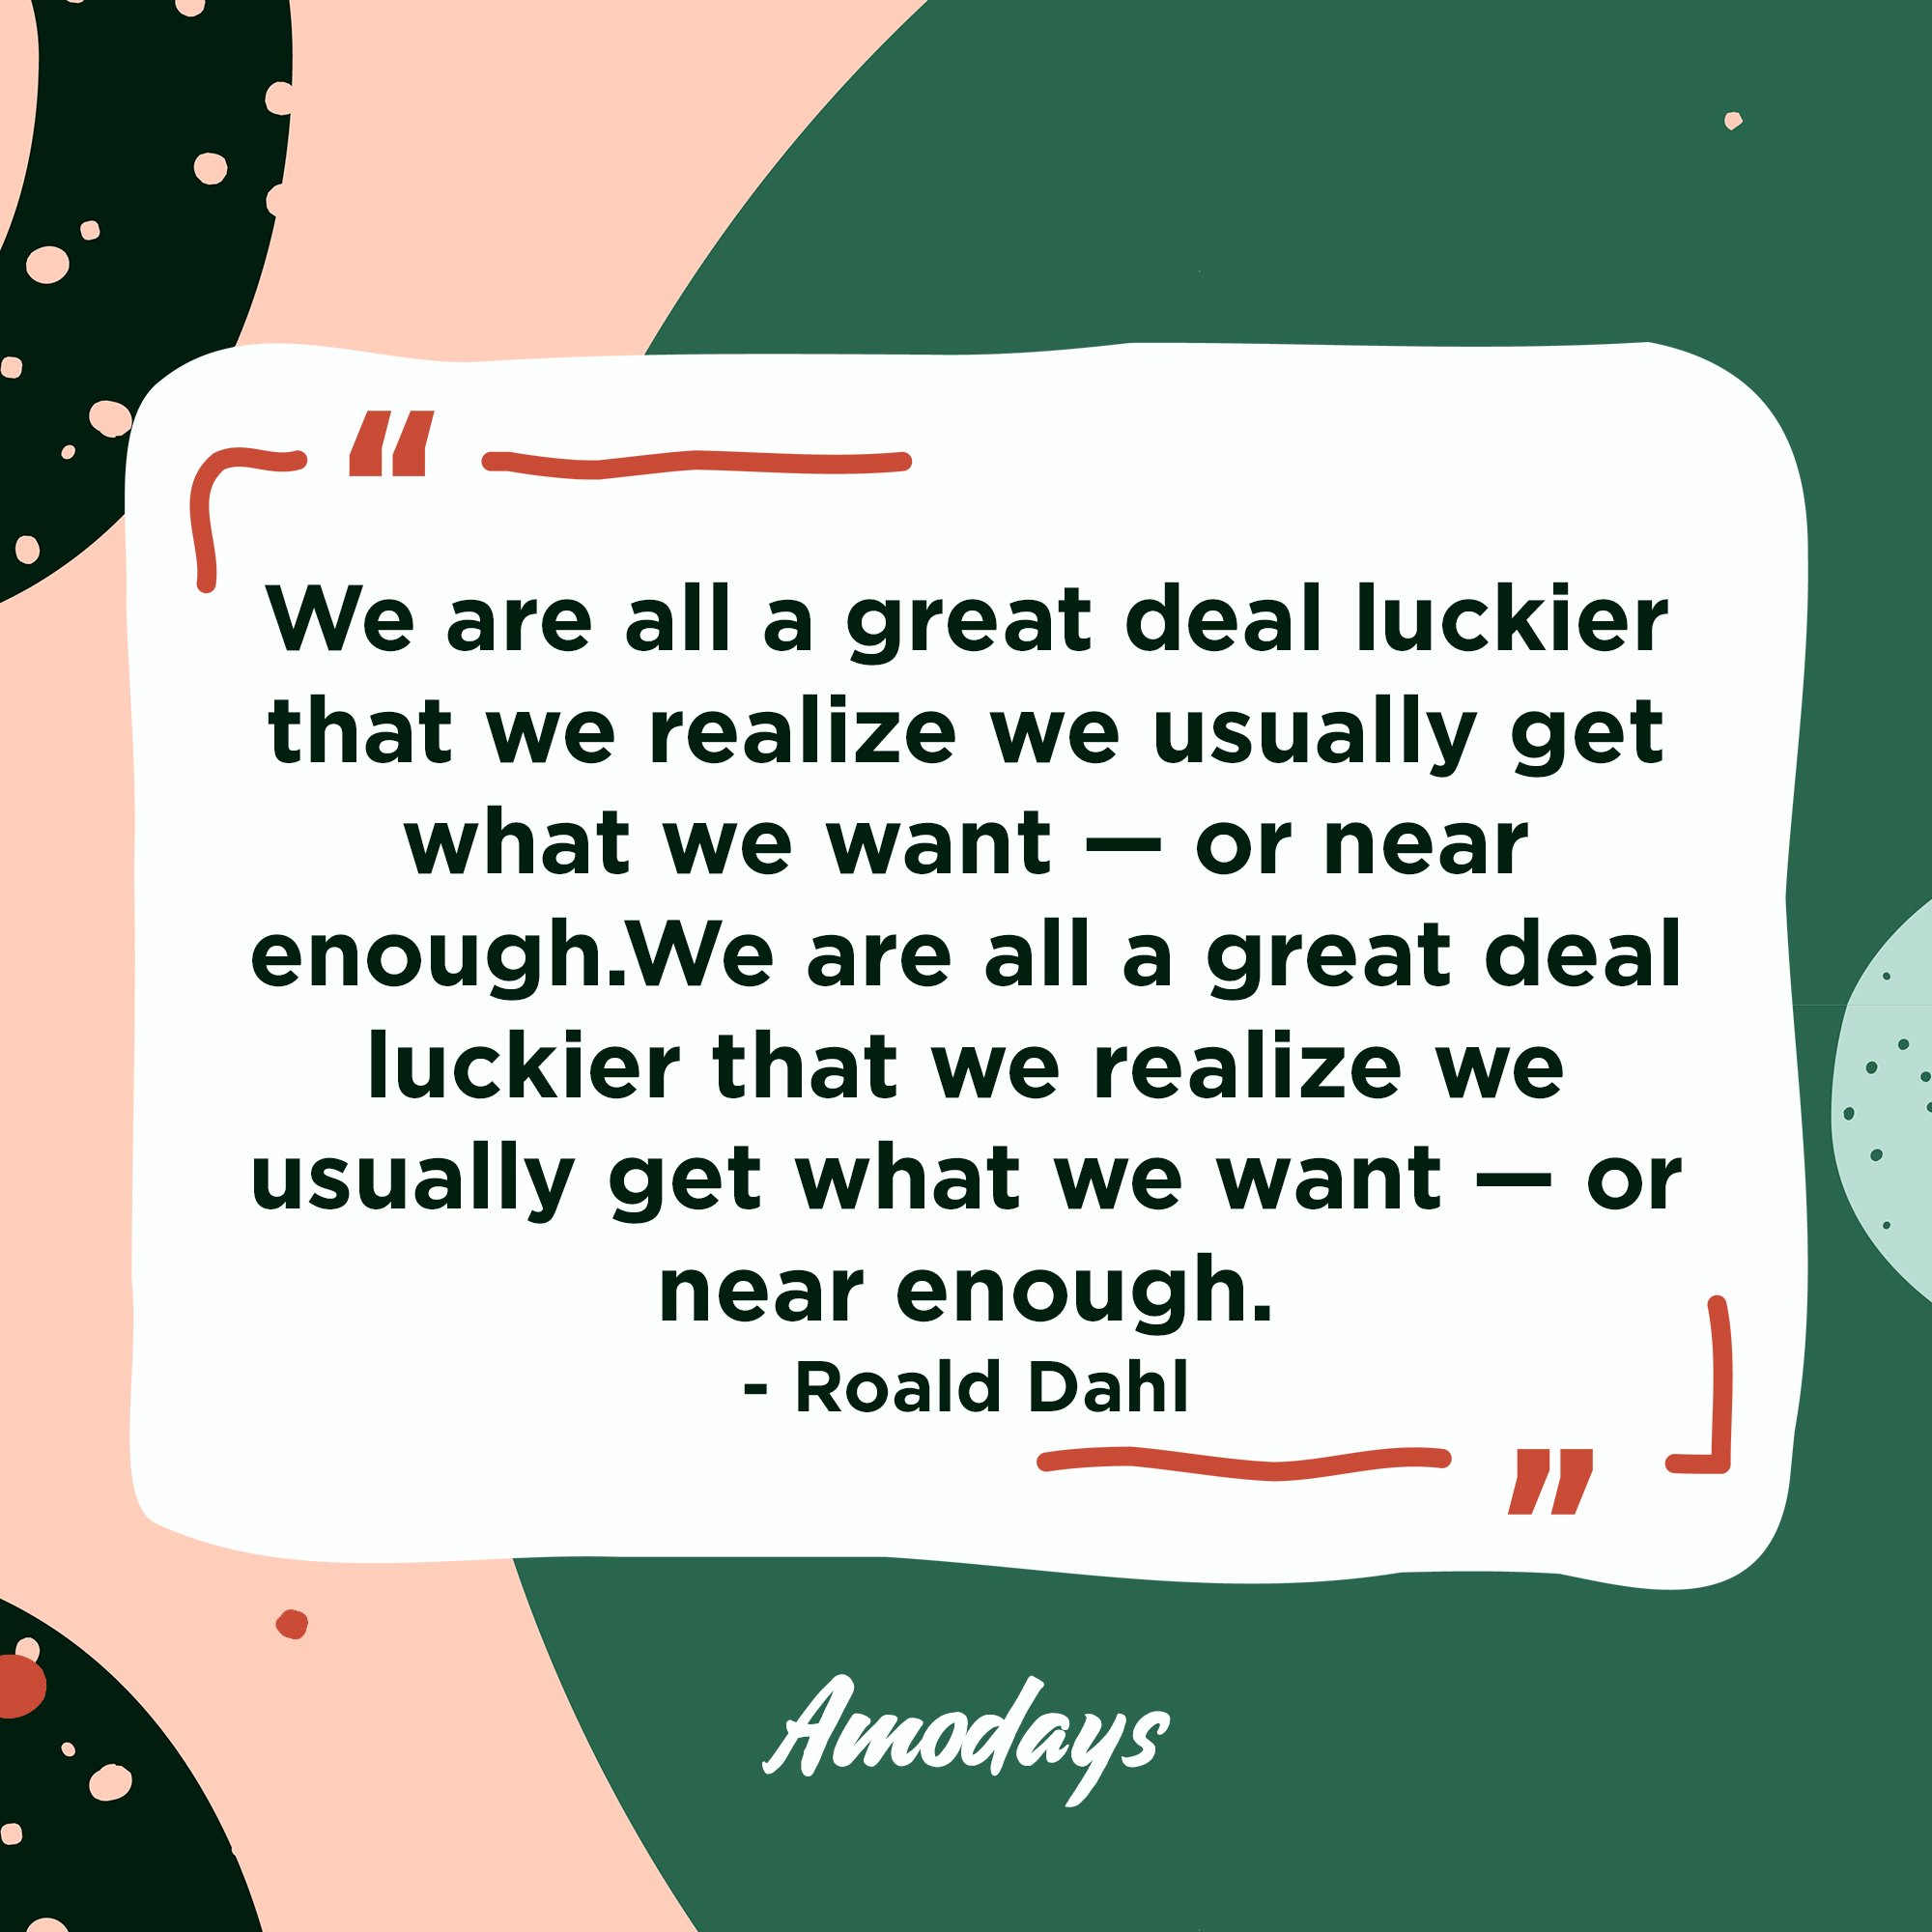 Roald Dahl's quote:  "We are all a great deal luckier that we realize, we usually get what we want — or near enough." | Image: AmoDays